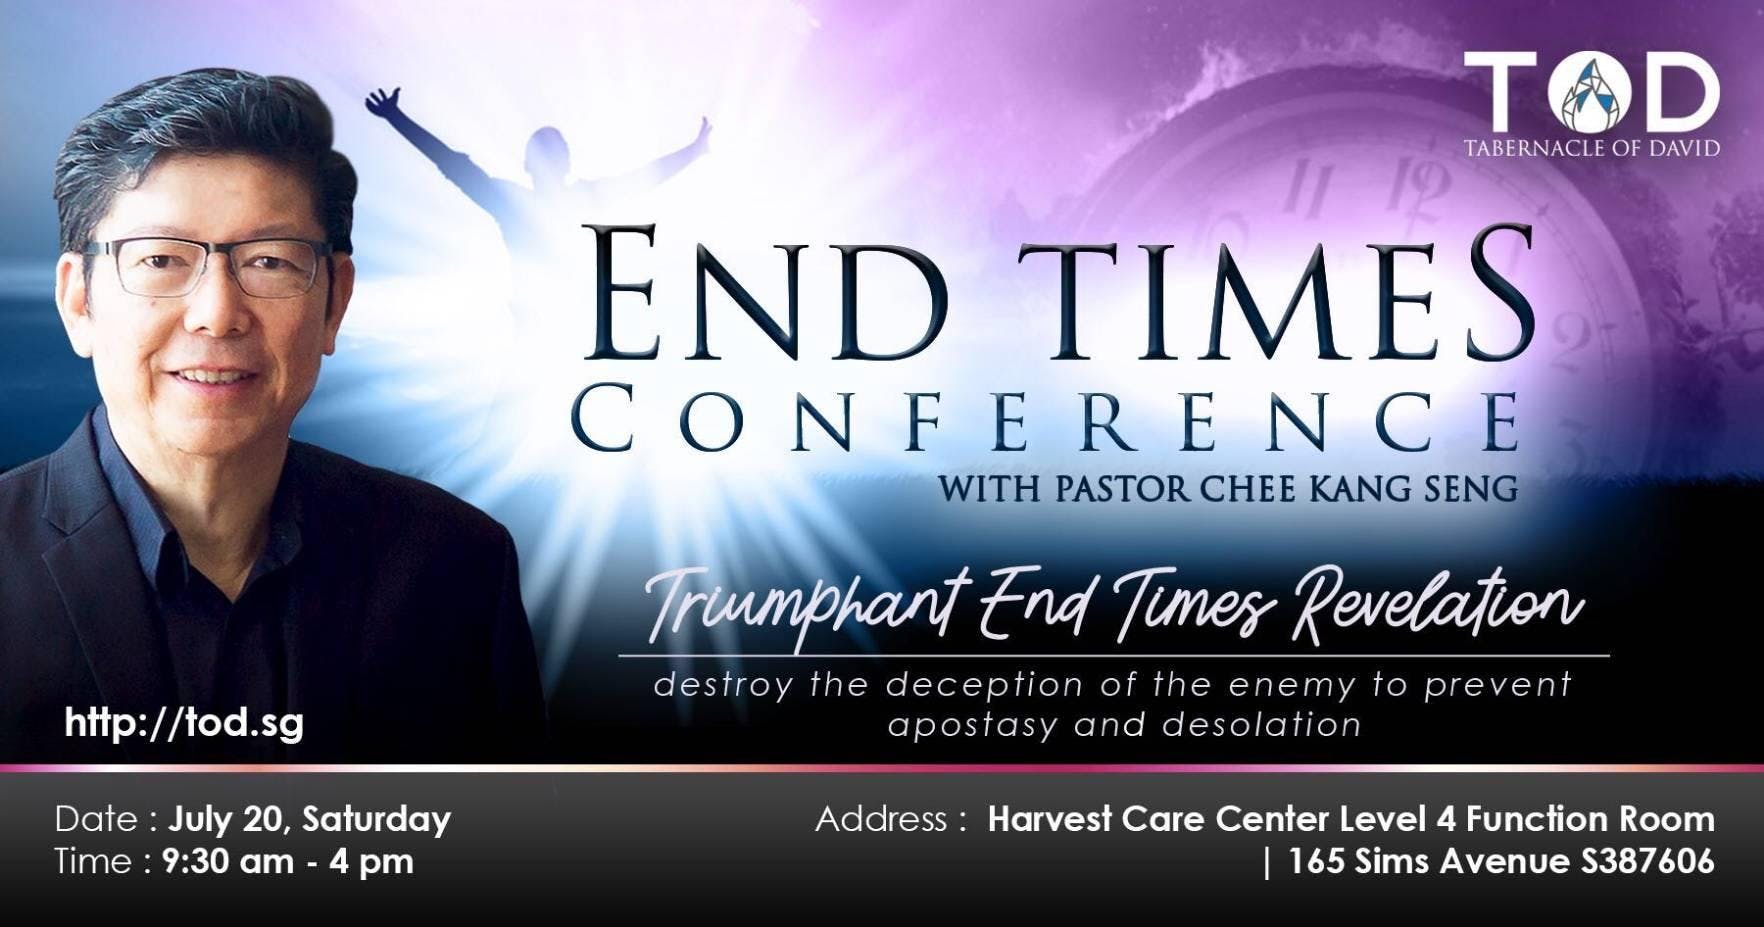 END TIMES CONFERENCE